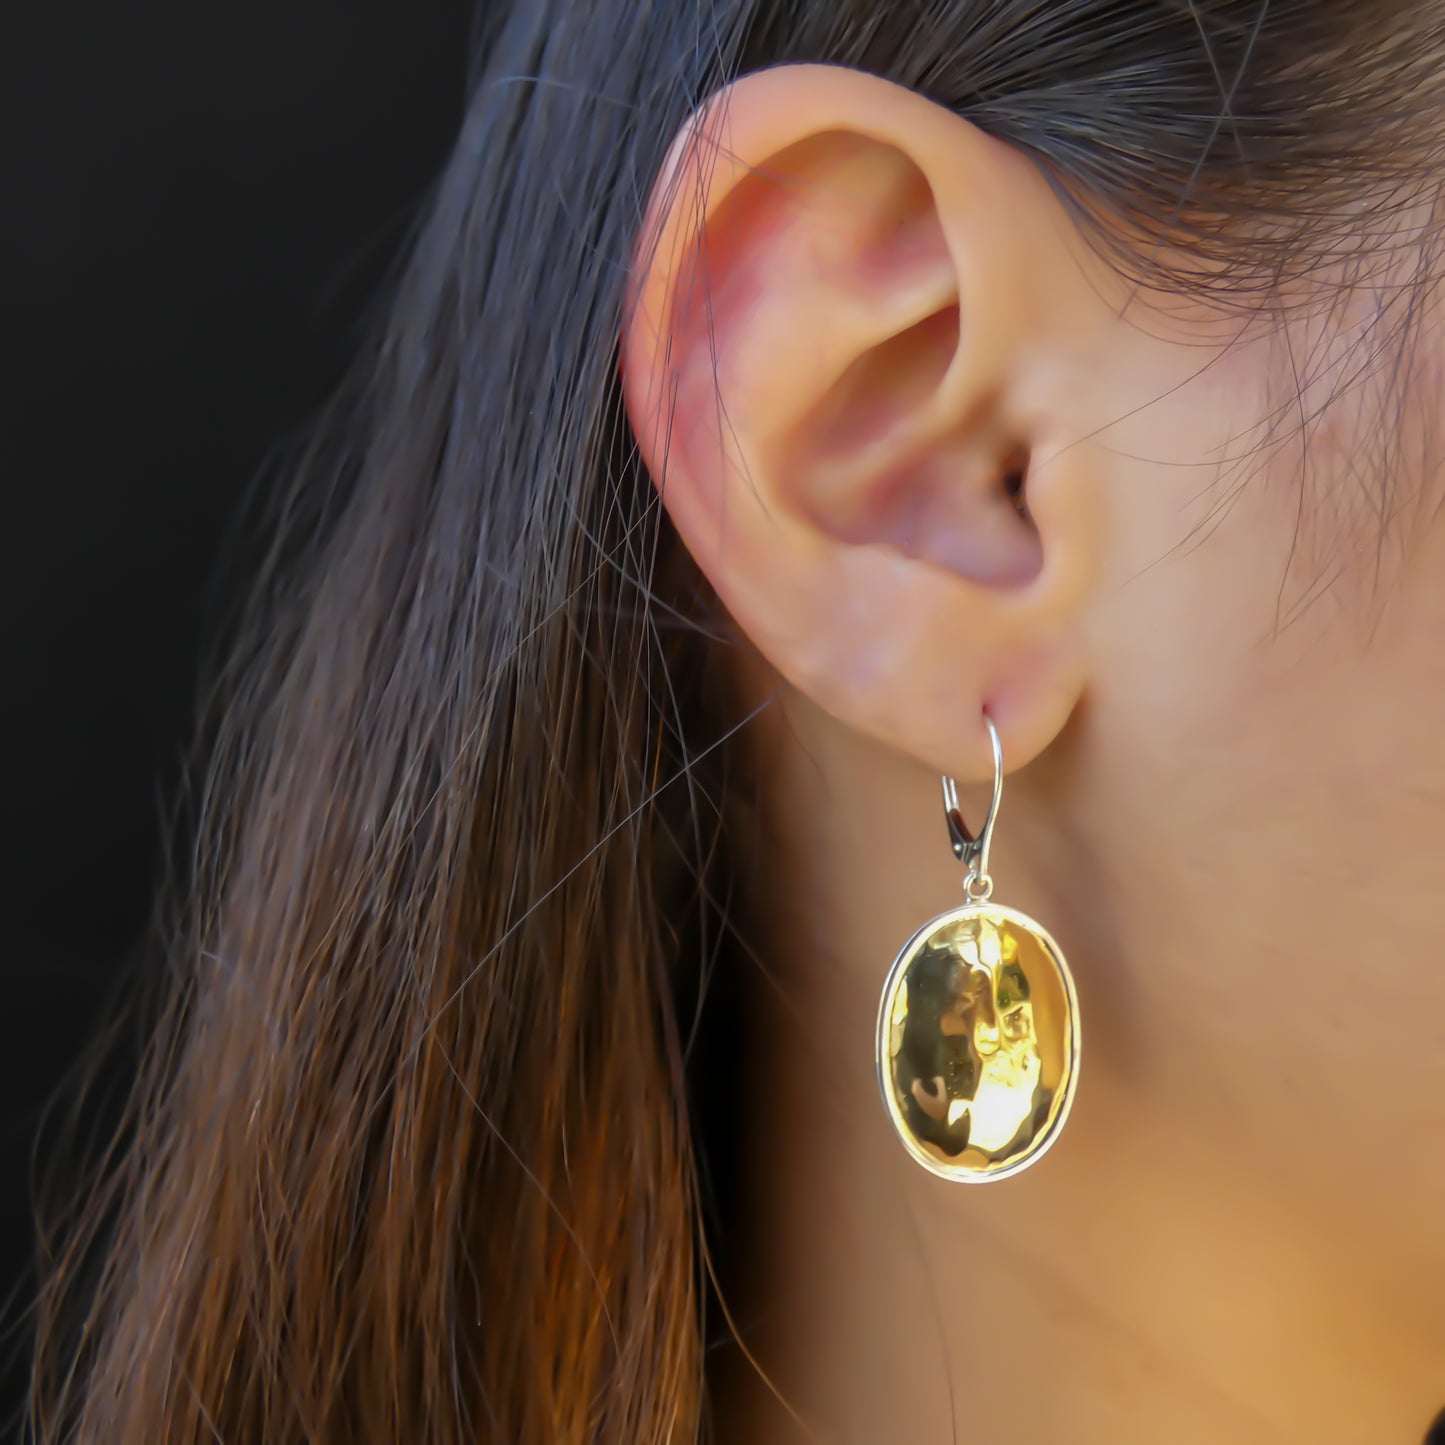 Woman wearing silver and gold oval hammered earrings.